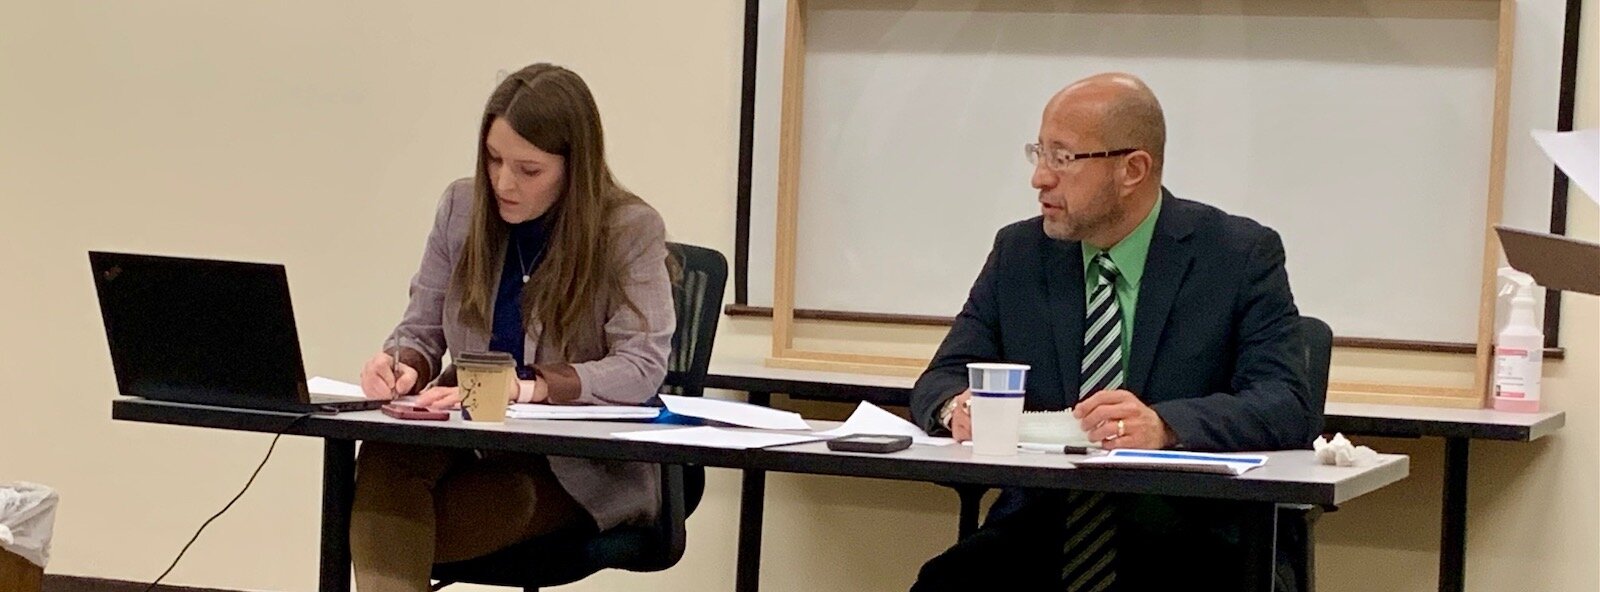 Kalamazoo County Clerk Meredith Place and Chief Probate Judge Curtis Bell were present at Wednesday’s meeting of the Kalamazoo County Election Commission. Attending the meeting remotely was Kalamazoo Treasurer Thomas Whitener.